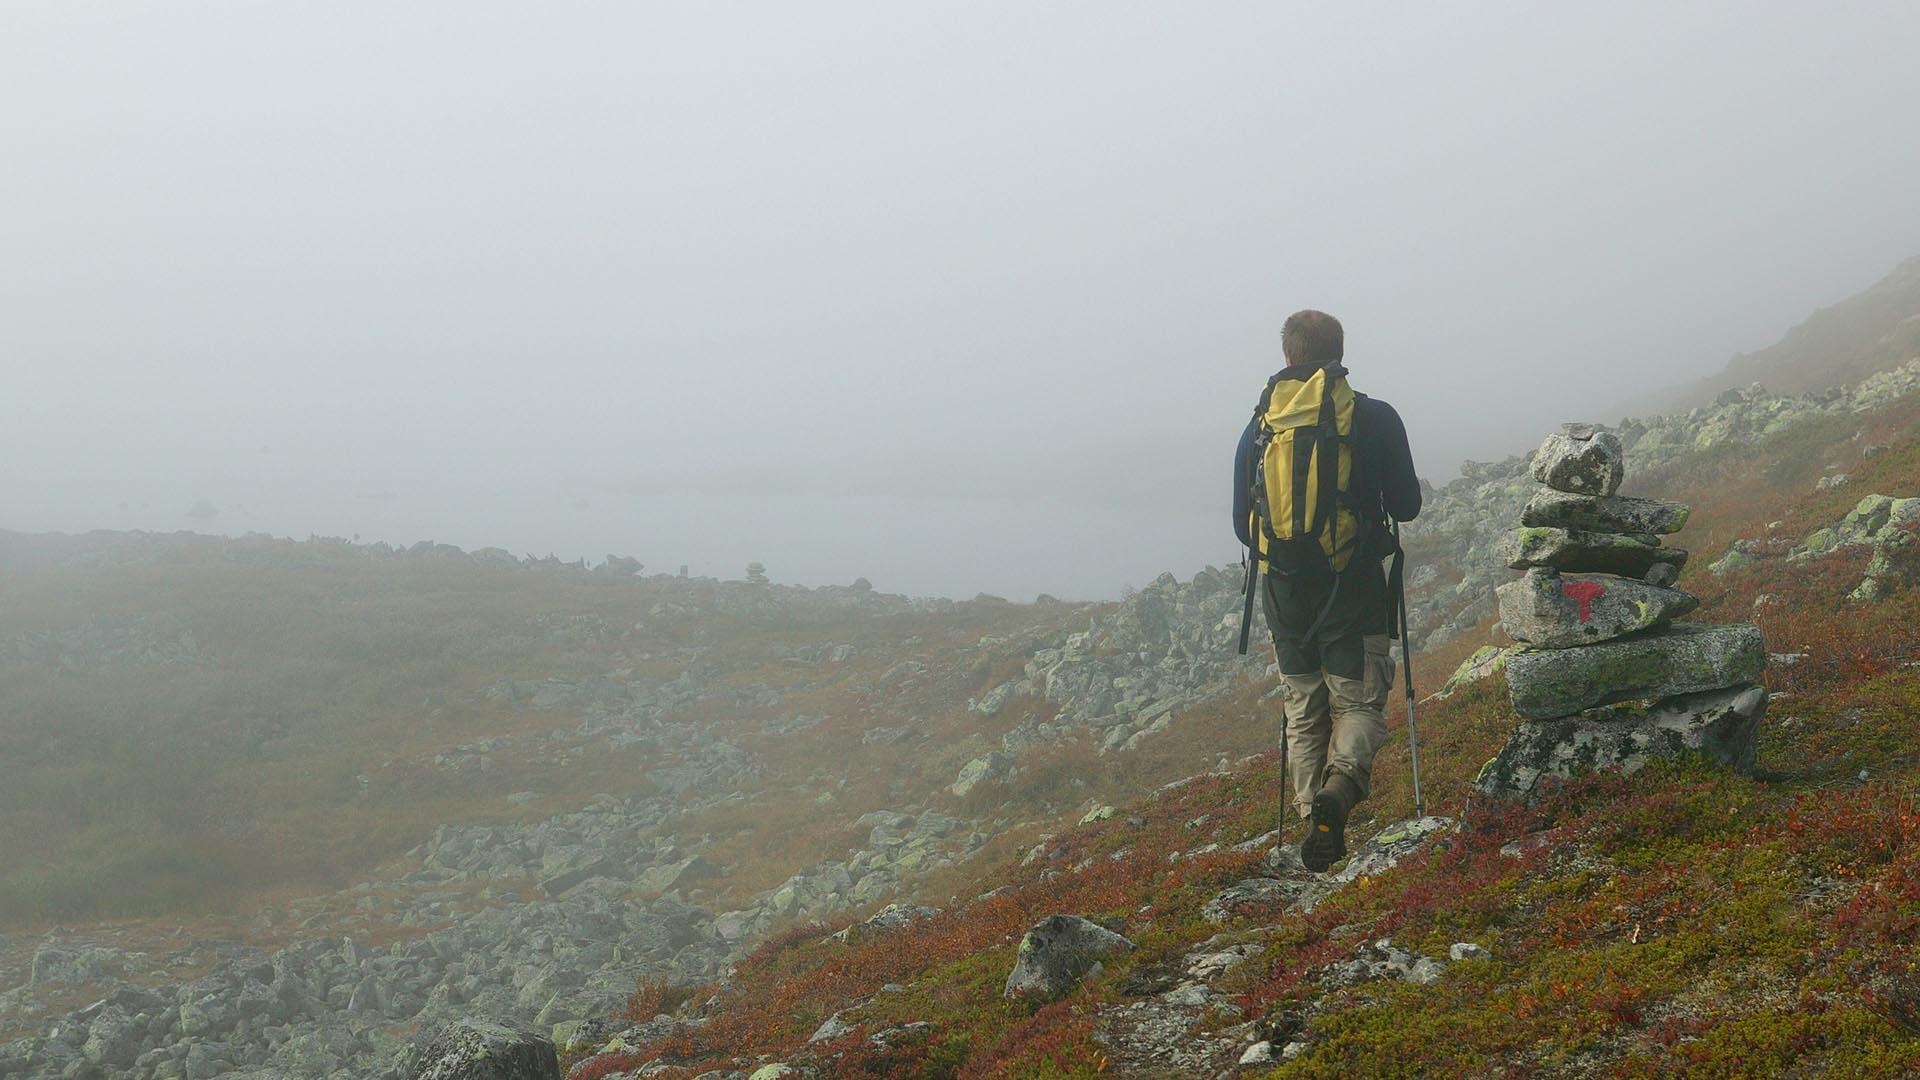 A mountain hiker with a yellow backpack walks past a marking cairn along a trail during fog.